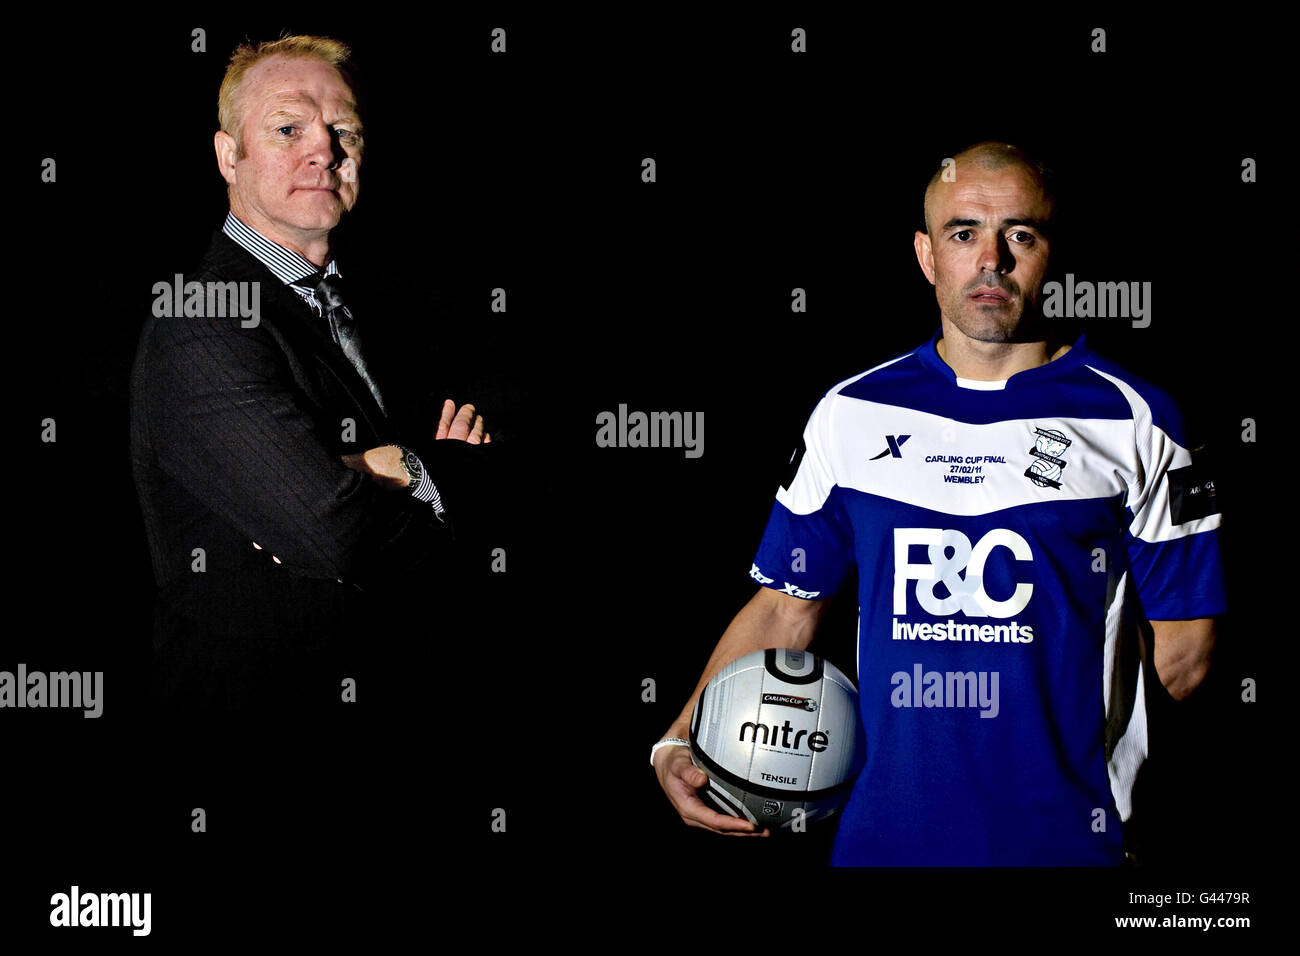 Soccer - Carling Cup Final Preview - Birmingham City Photocall Stock Photo